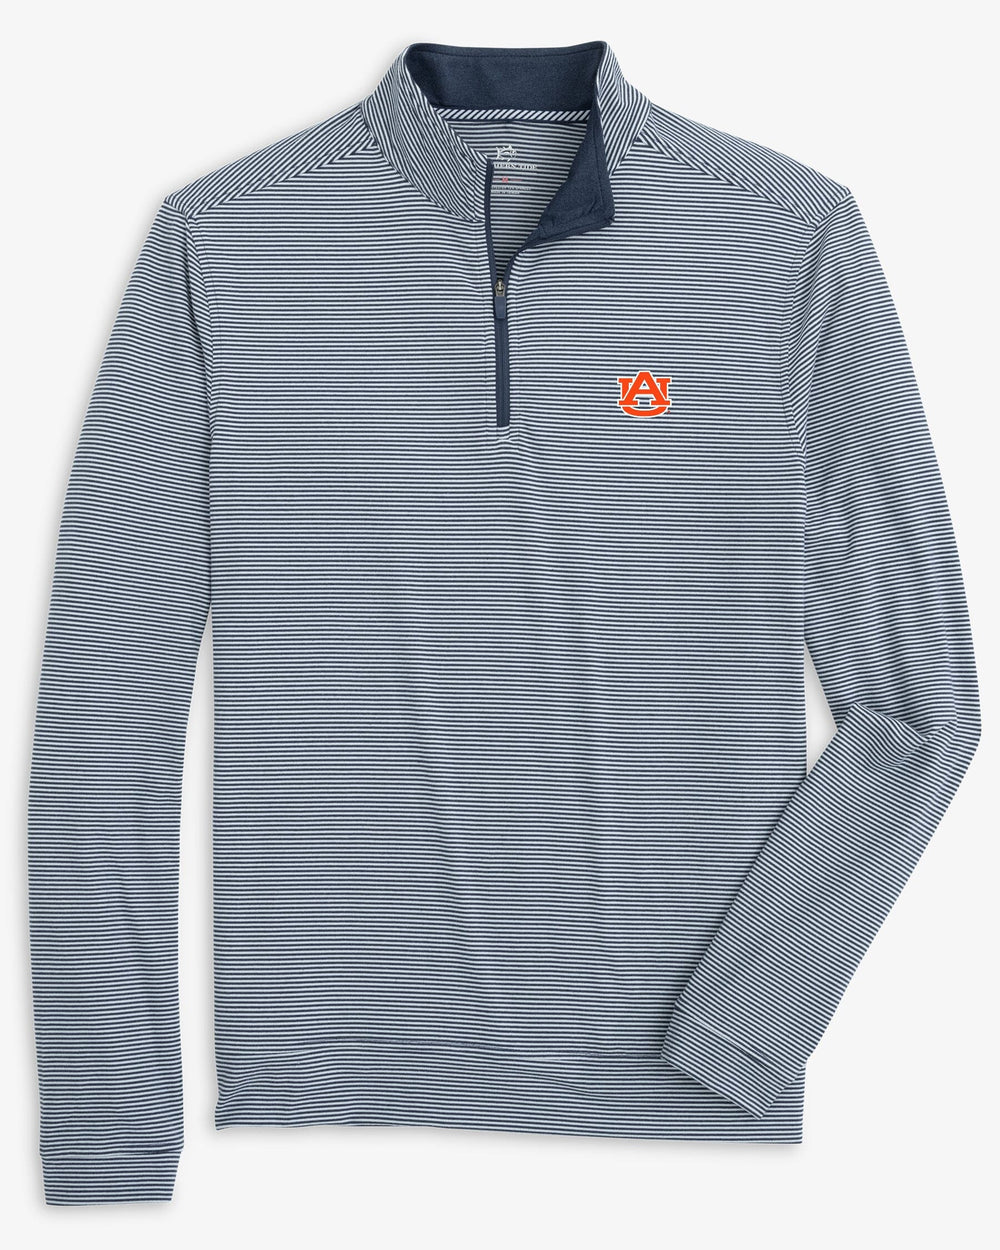 The front view of the Auburn Tigers Cruiser Micro-Stripe Heather Quarter Zip by Southern Tide - Heather Navy